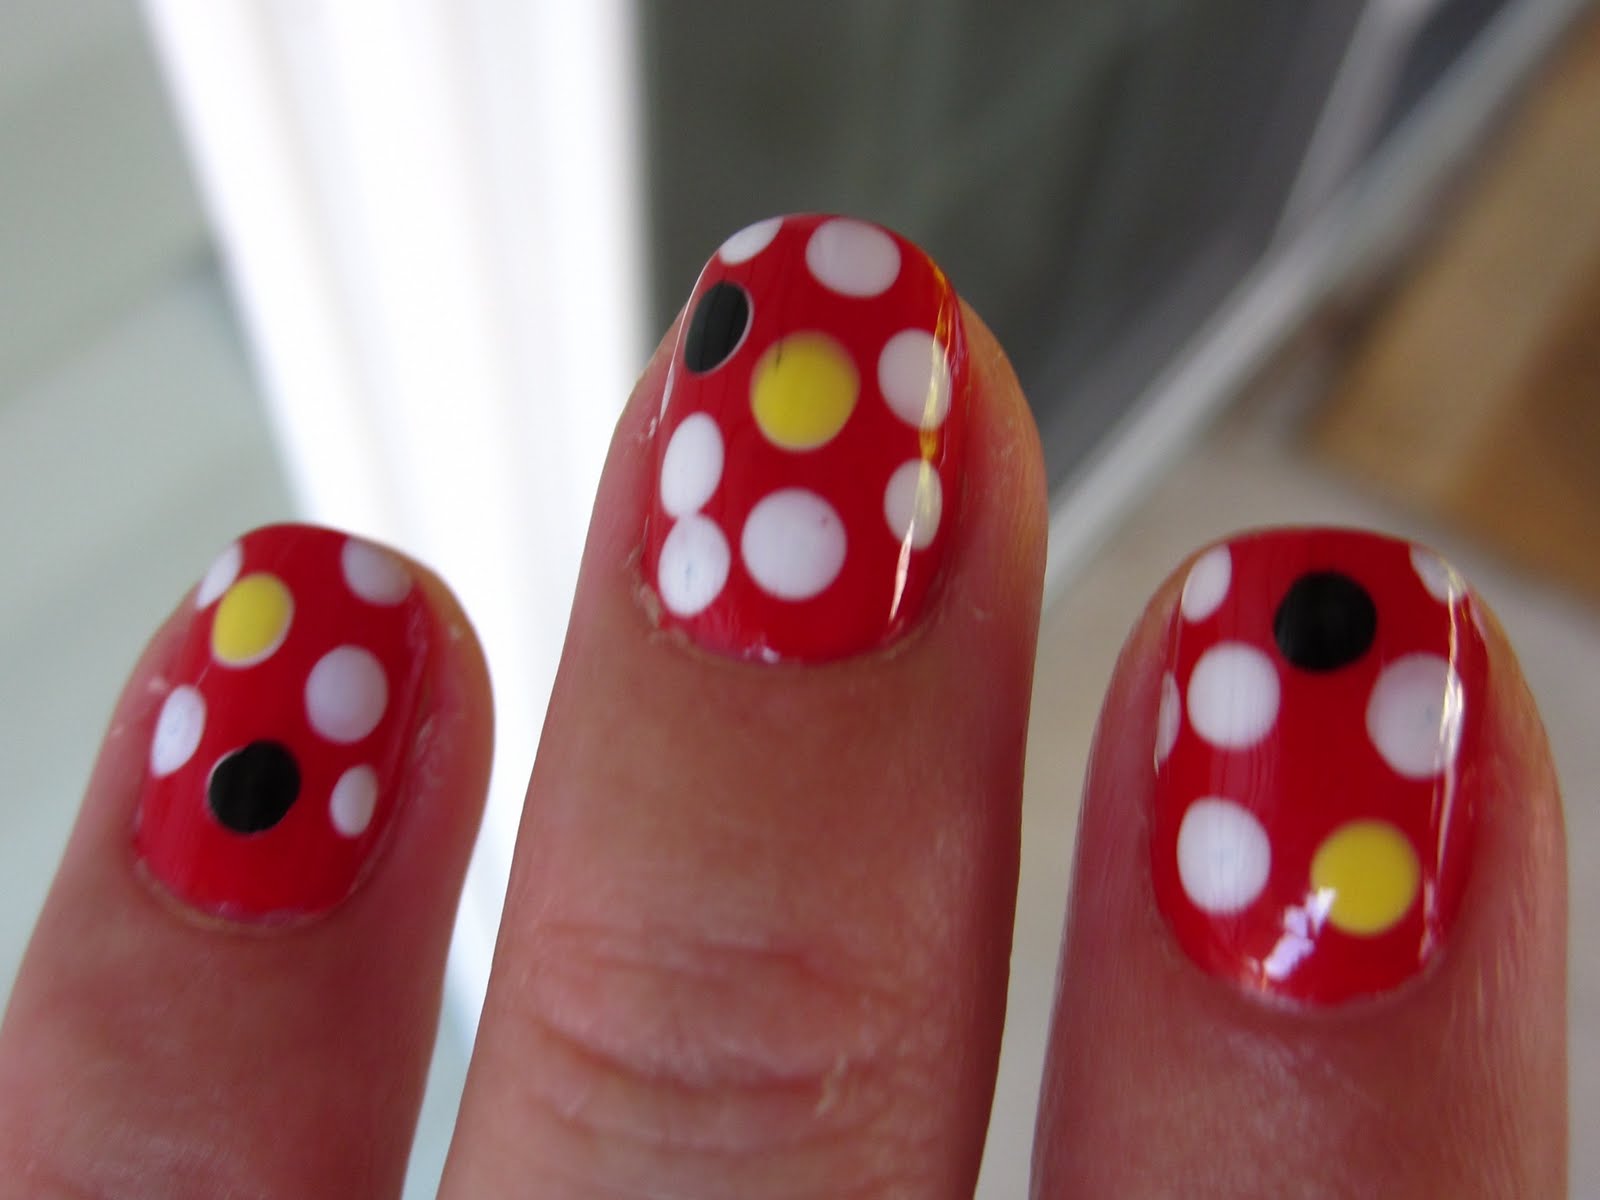 1. Minnie Mouse Gel Nail Design Tutorial - wide 4